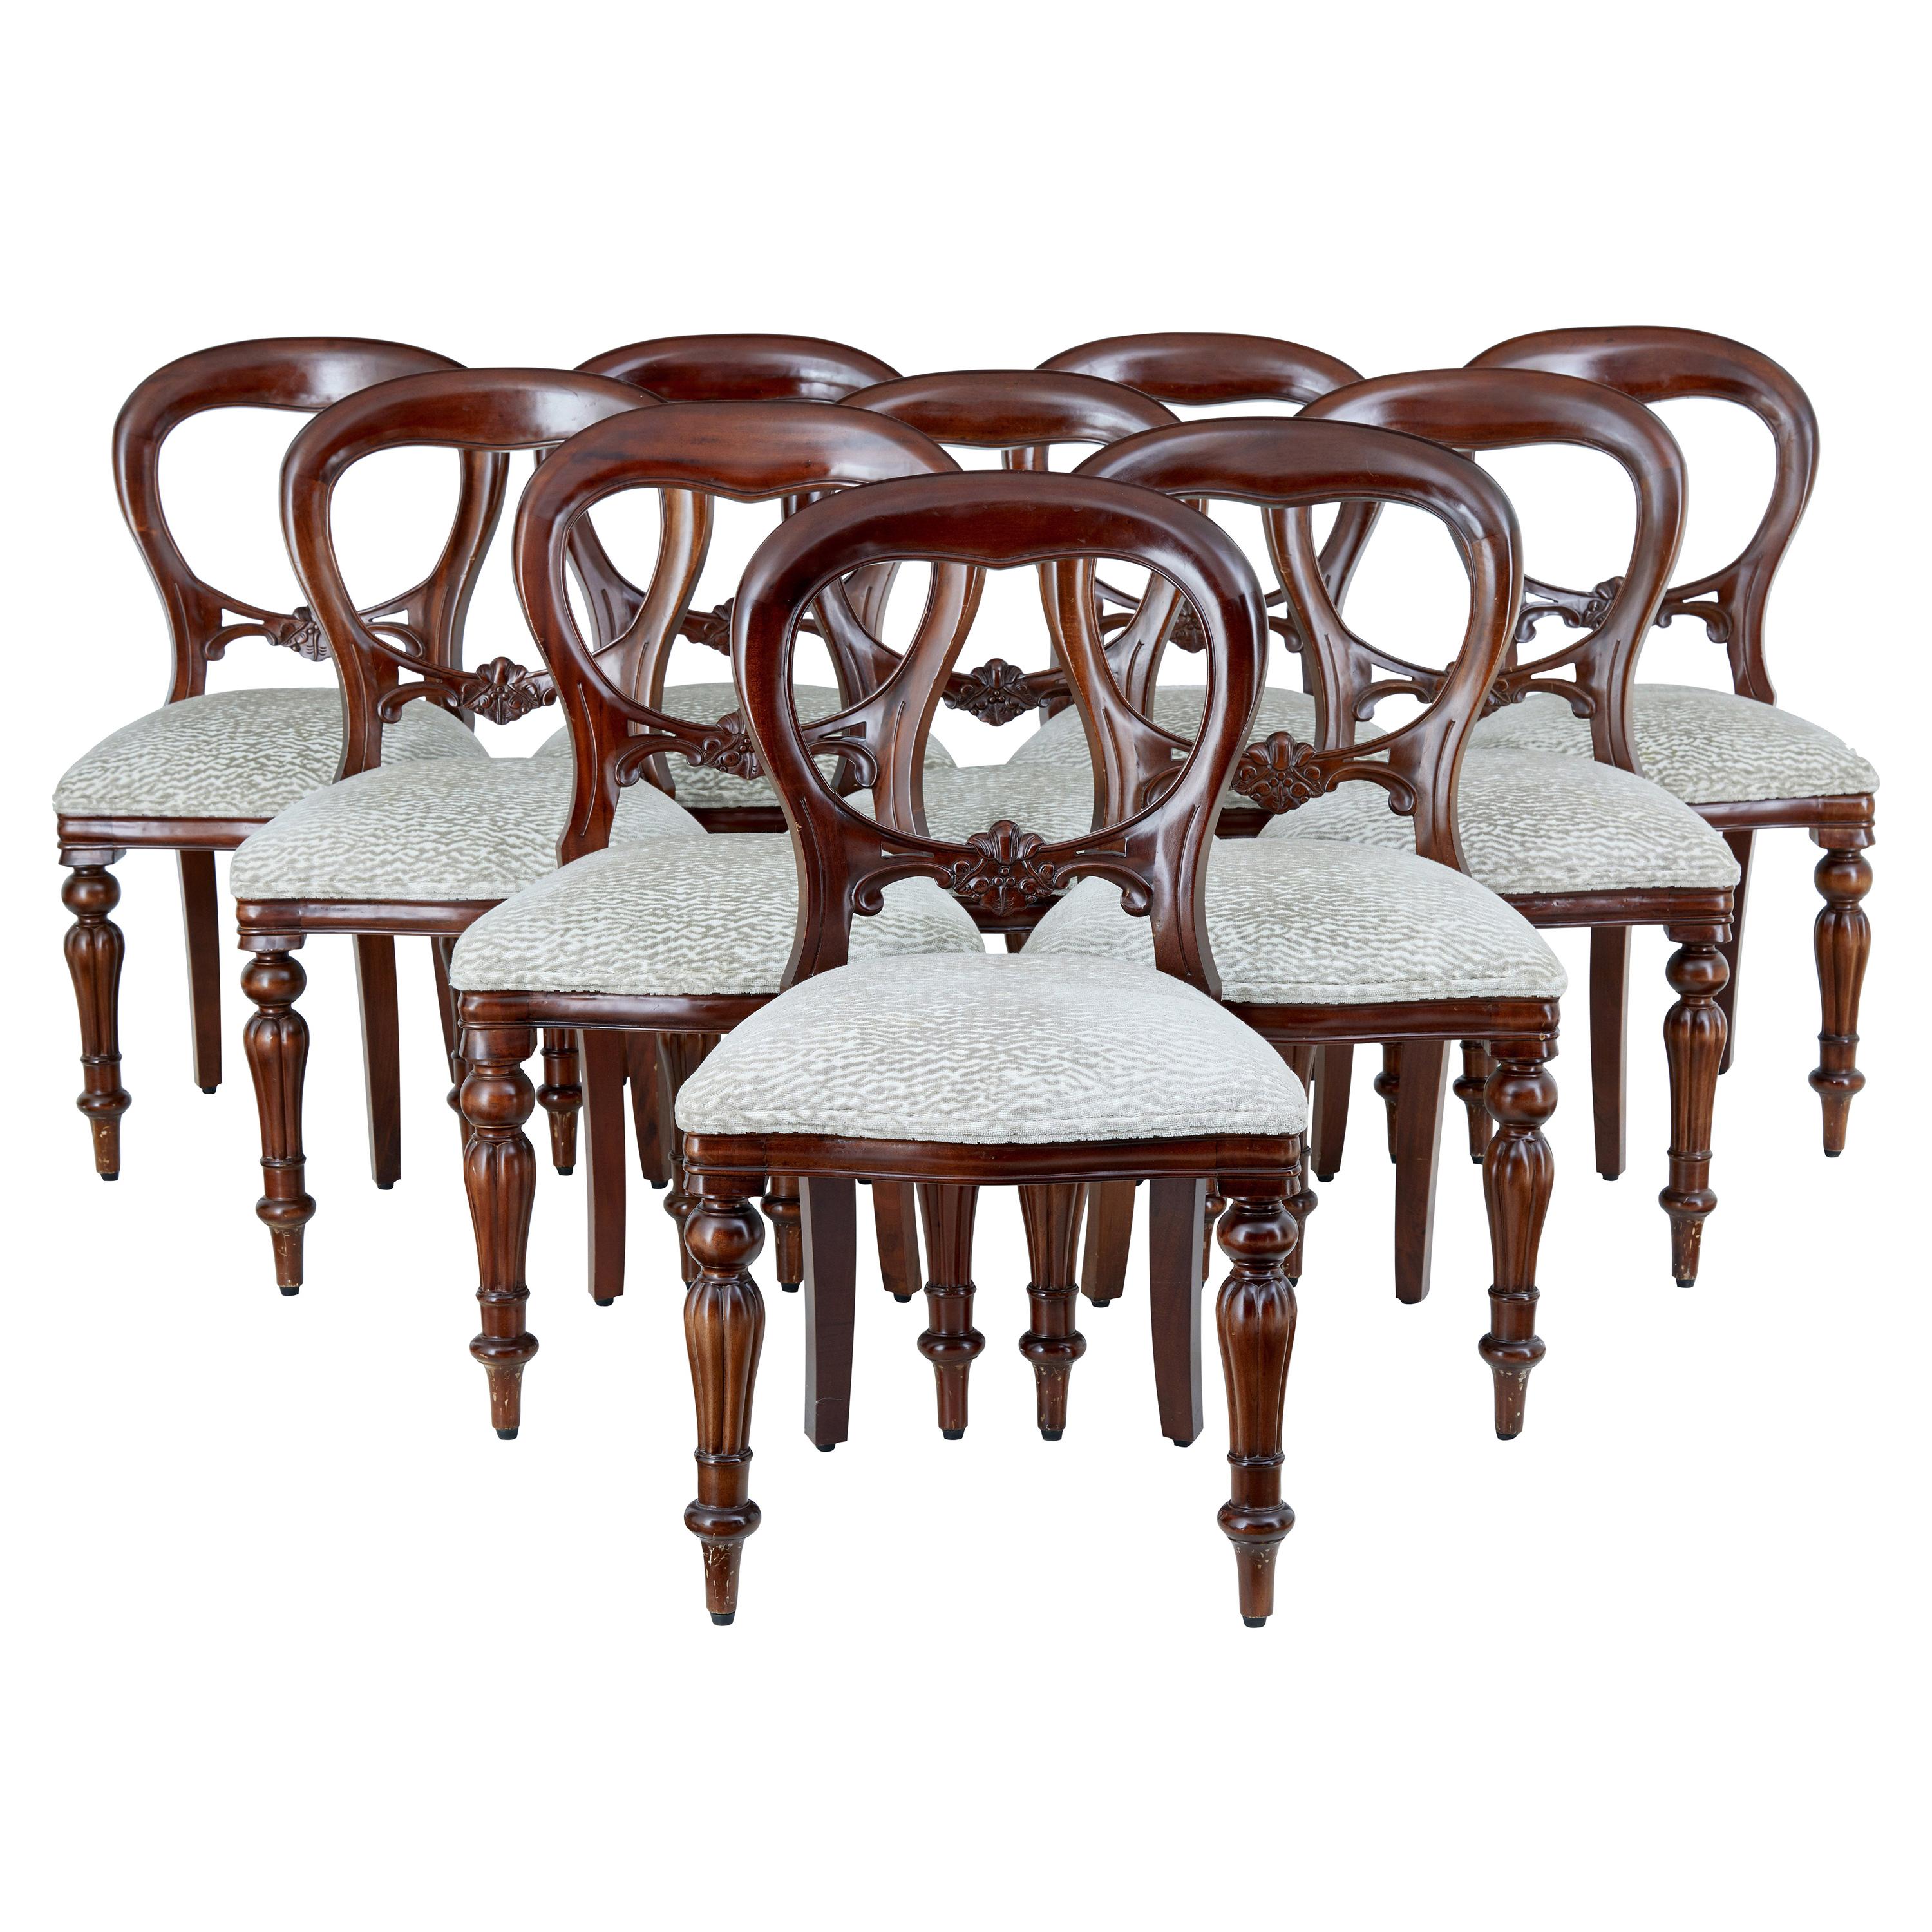 Set of 12 Victorian Style Balloon Back Mahogany Dining Chairs